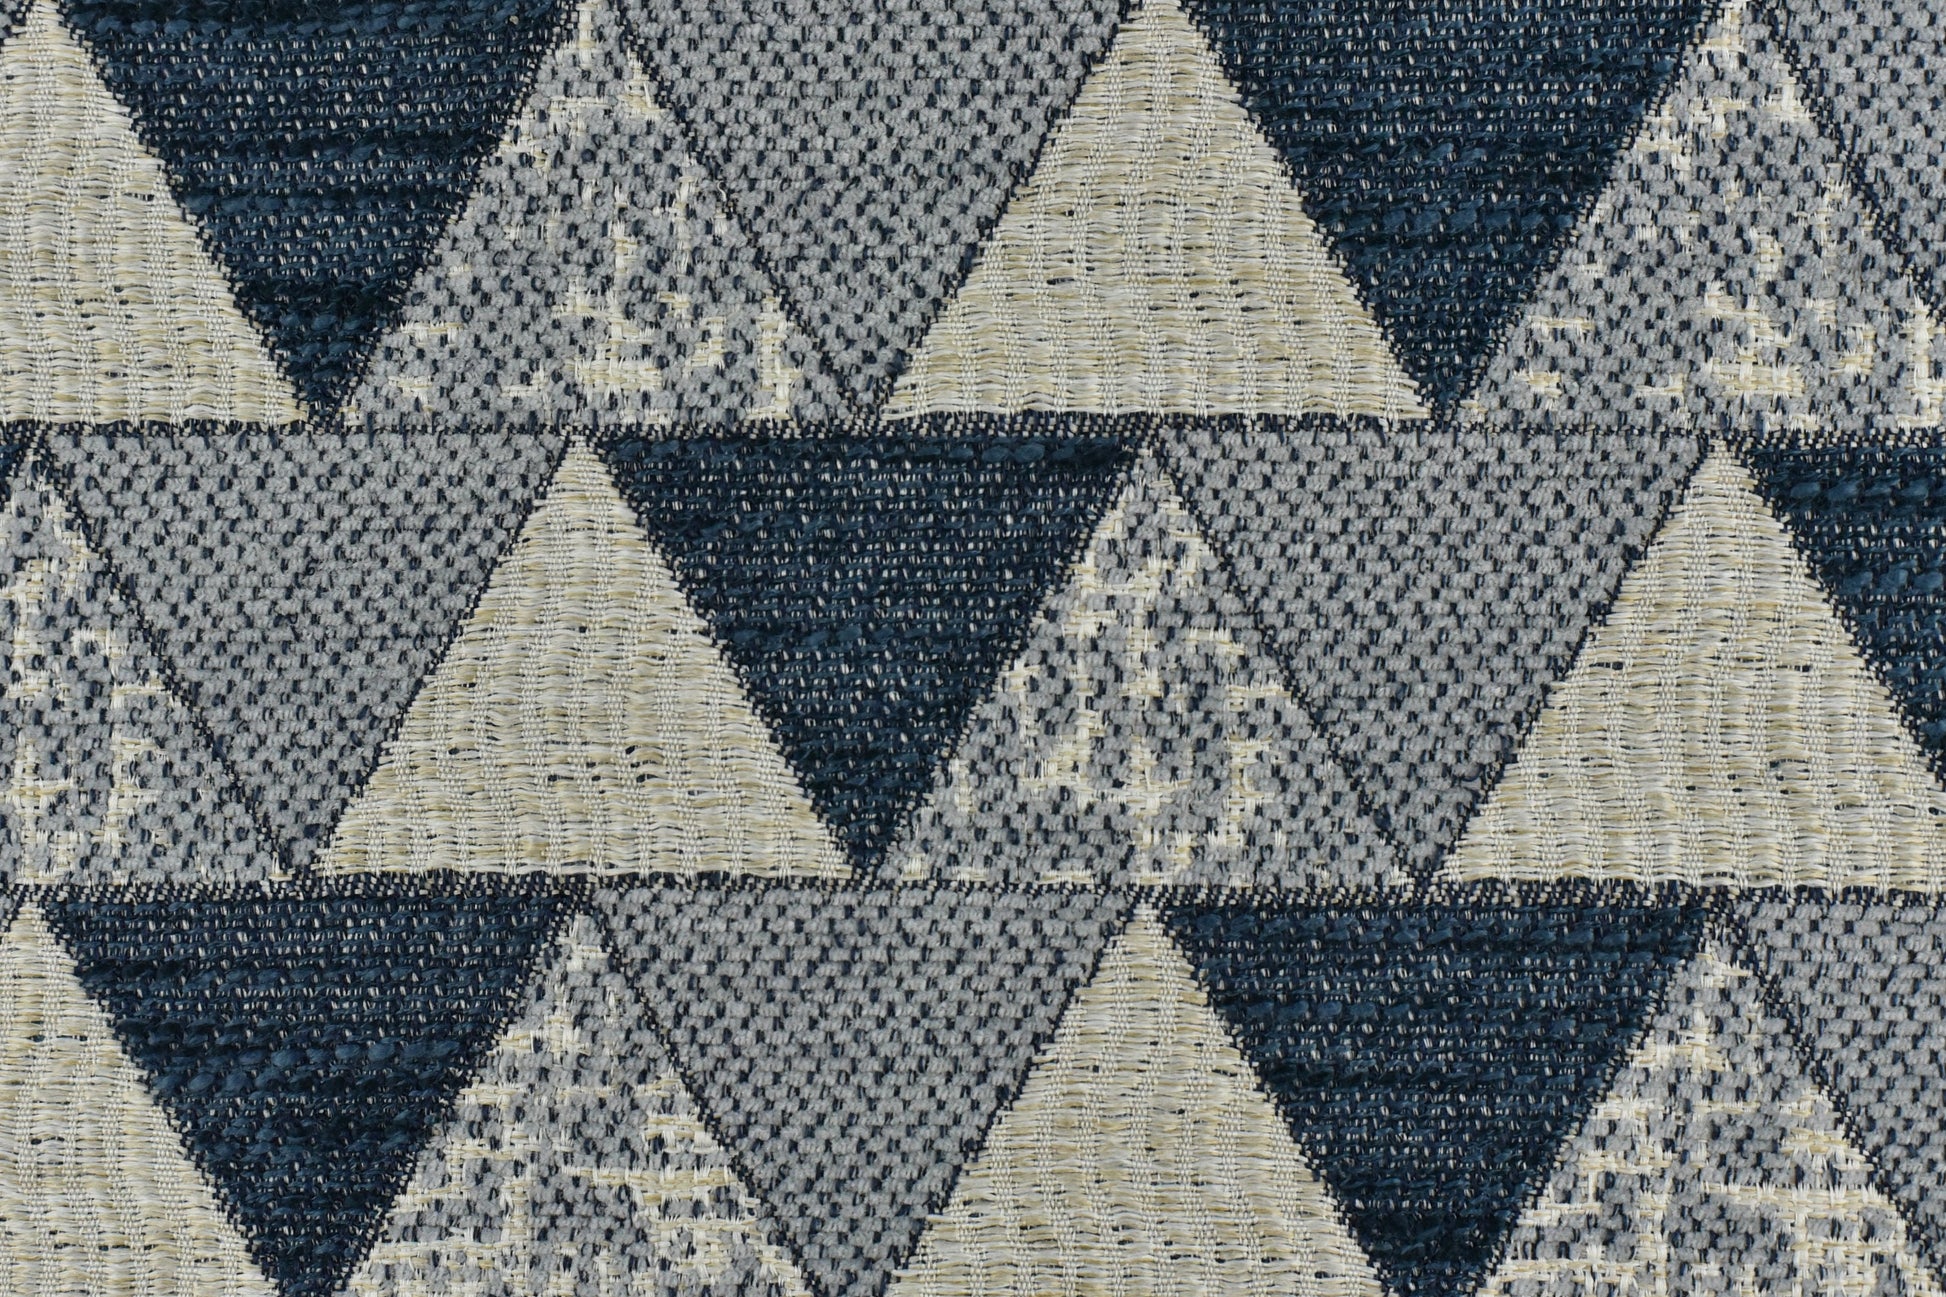 New Triangle Geometric Textured Jacquard Upholstery Fabric In Navy Blue Cream Grey|Heavy Duty Home Decor Fabric For Chair Pillow